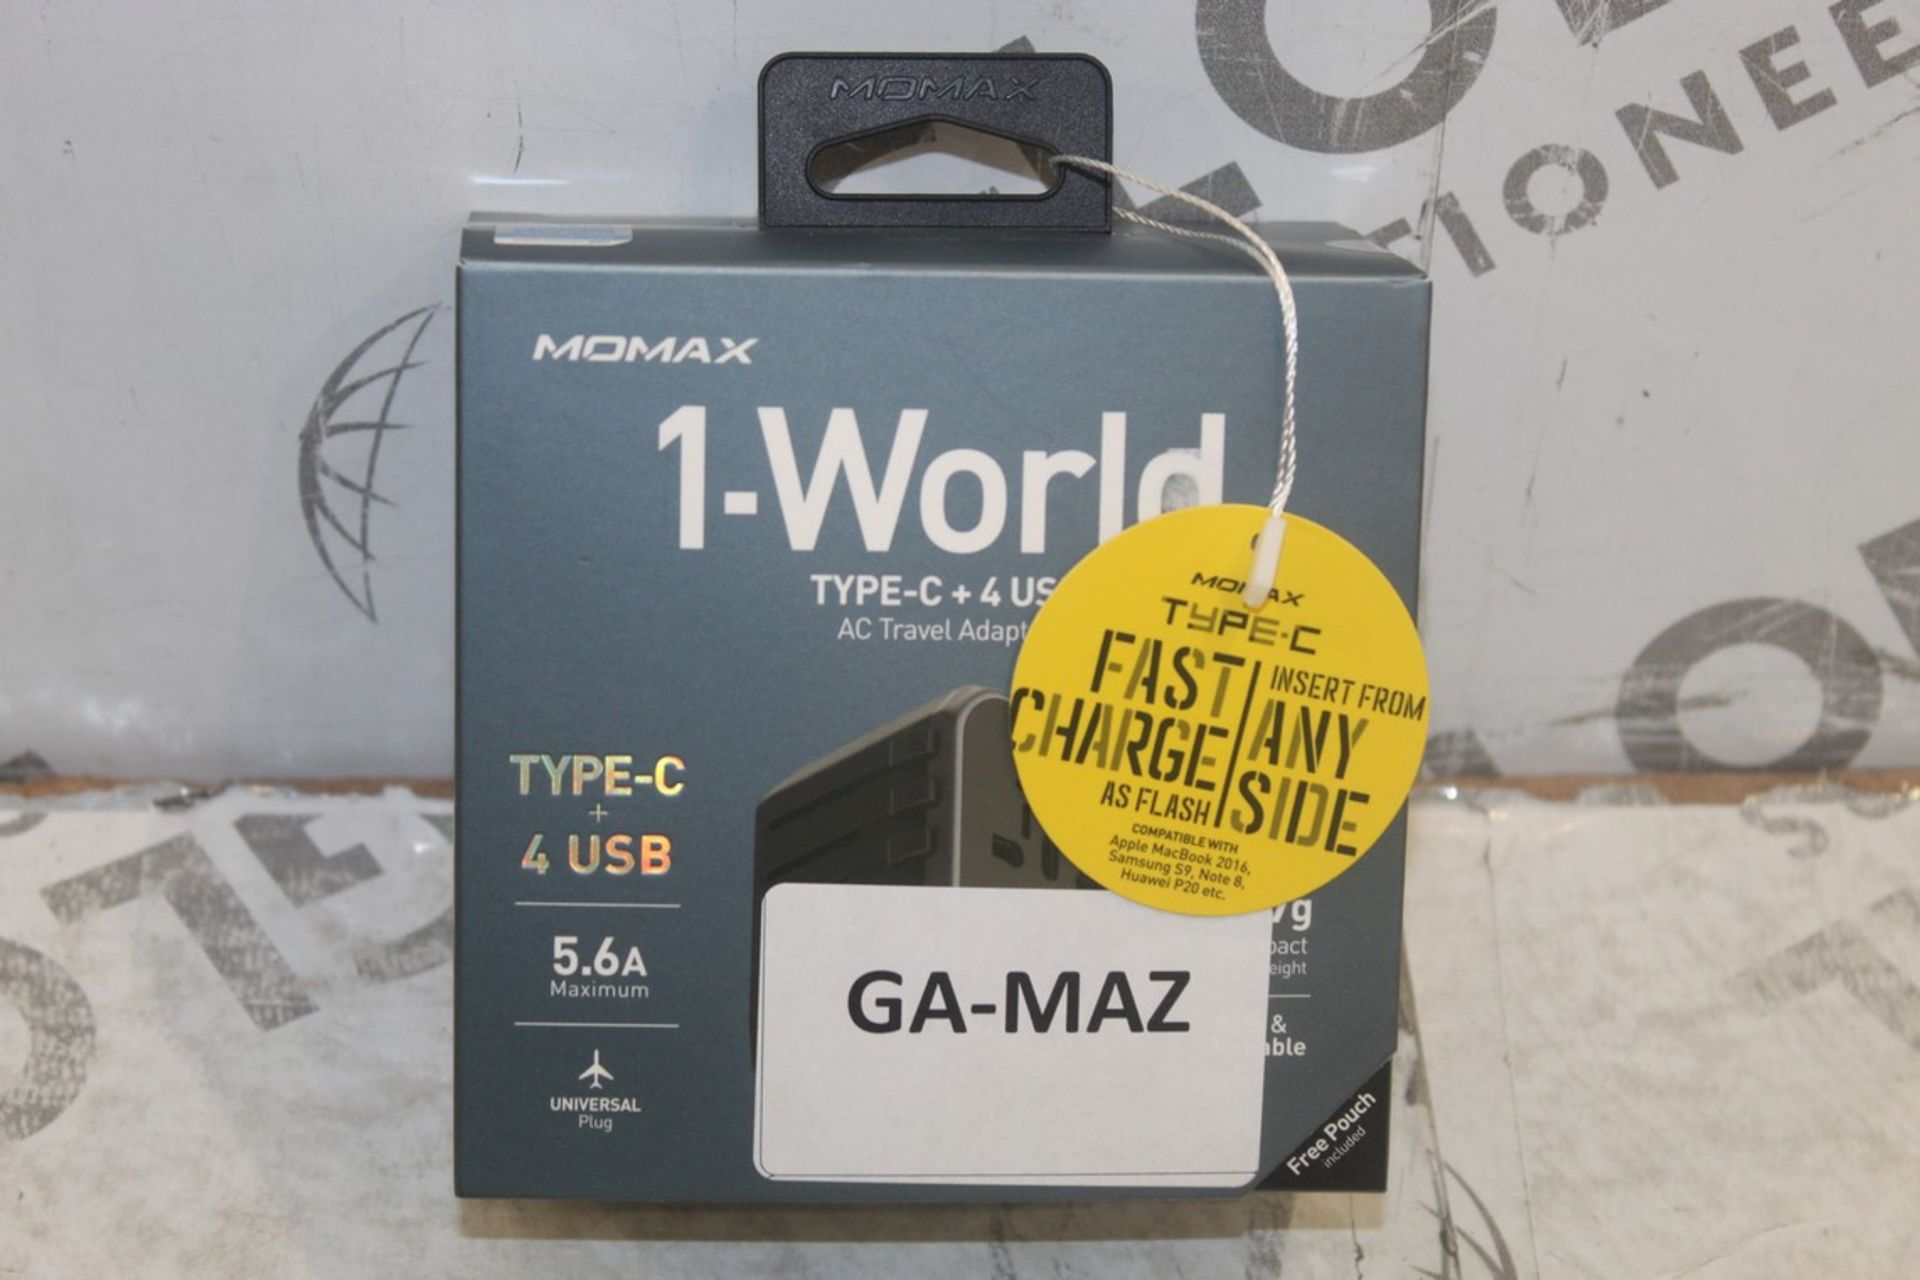 Lot To Contain 5 Momax 1 world Type C + 4 USB Travel Adapter Combined RRP £150 (Pictures Are For